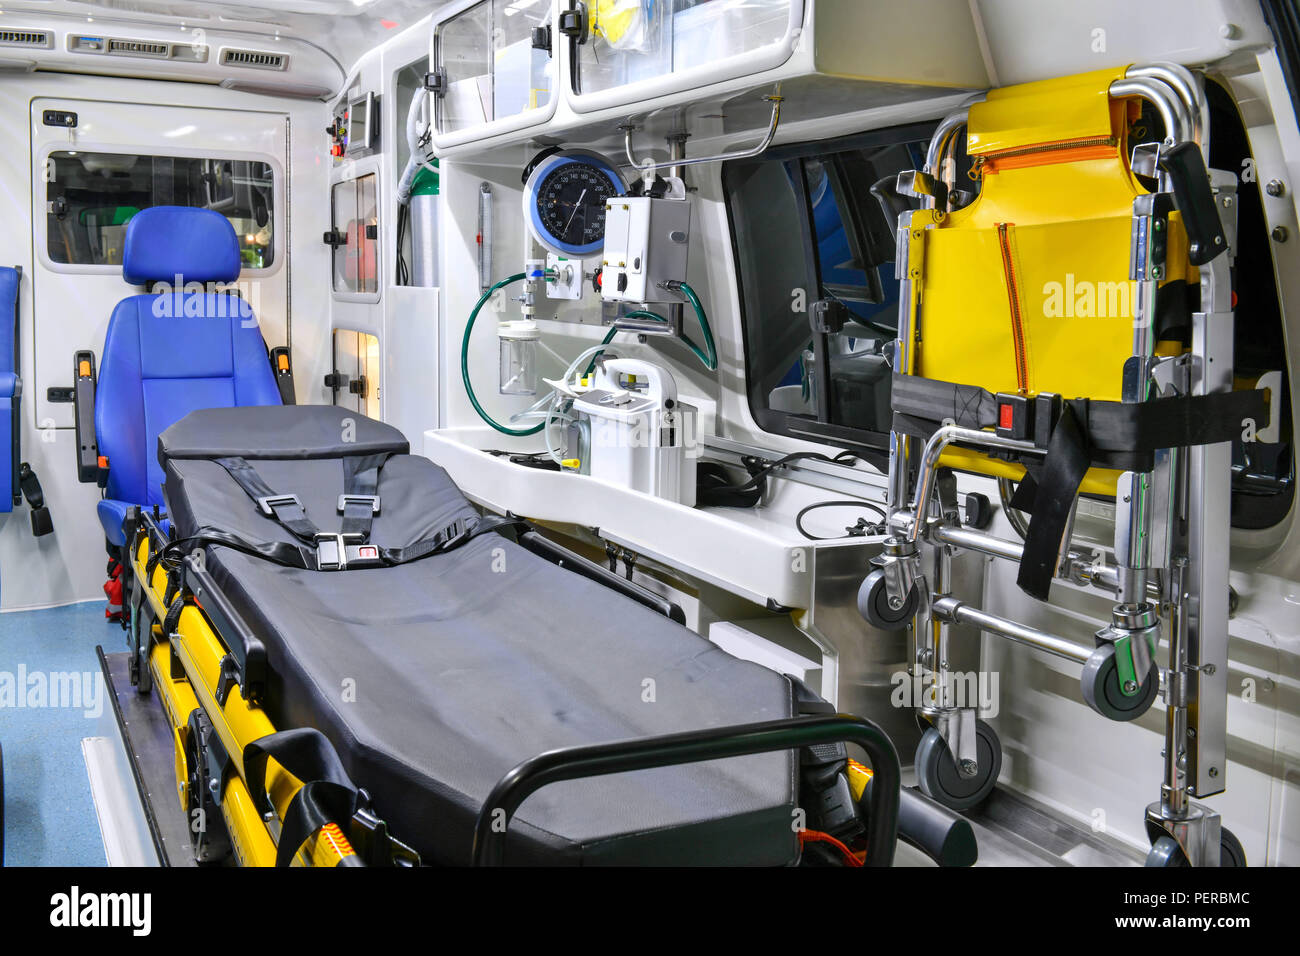 Emergency equipment and devices, Ambulance interior details. Stock Photo